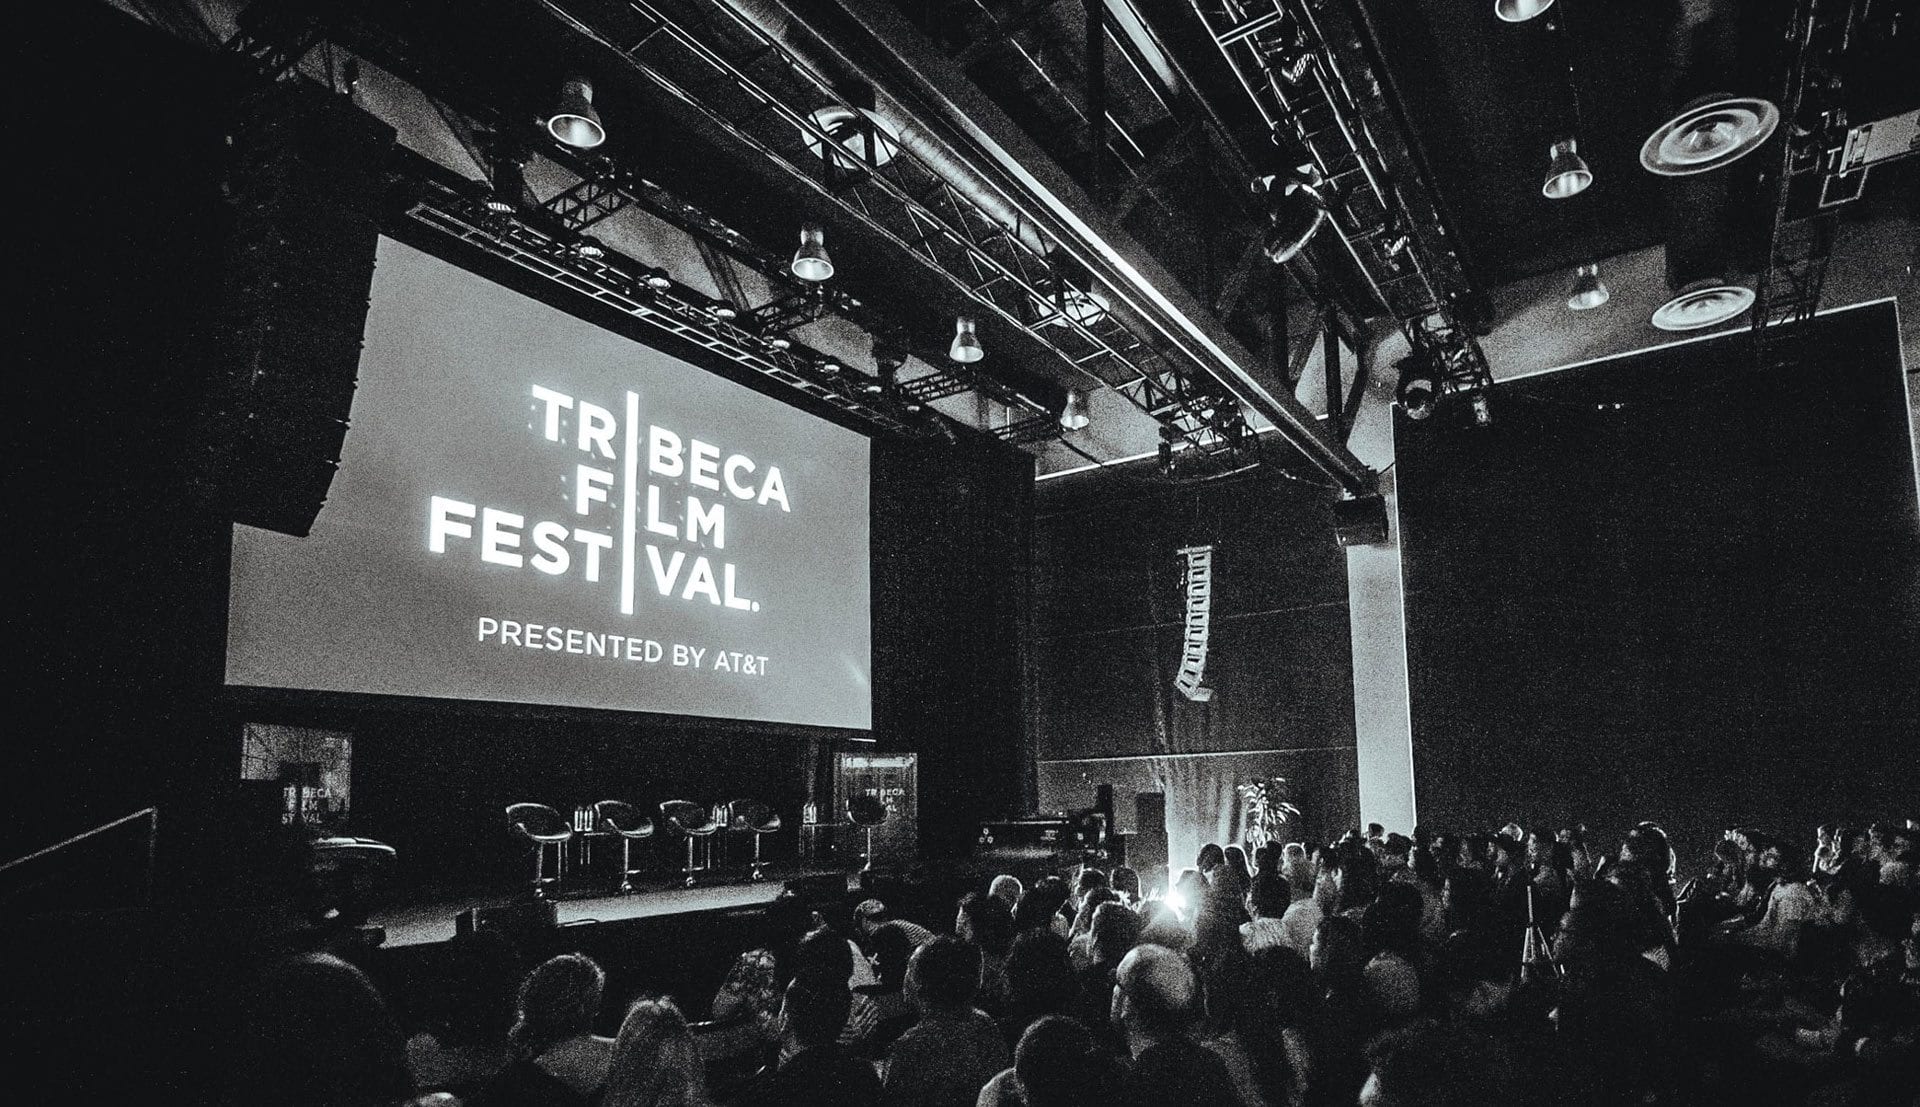 There’s a lot going on at Tribeca Film Festival 2018 – 96 films from 103 directors (46% of whom are women, don’t you know) – meaning there’s also a lot to be missed. That’s why we’ve put together a list of the ten most anticipated movies to help you whittle down those Tribeca schedules to the absolute essentials.